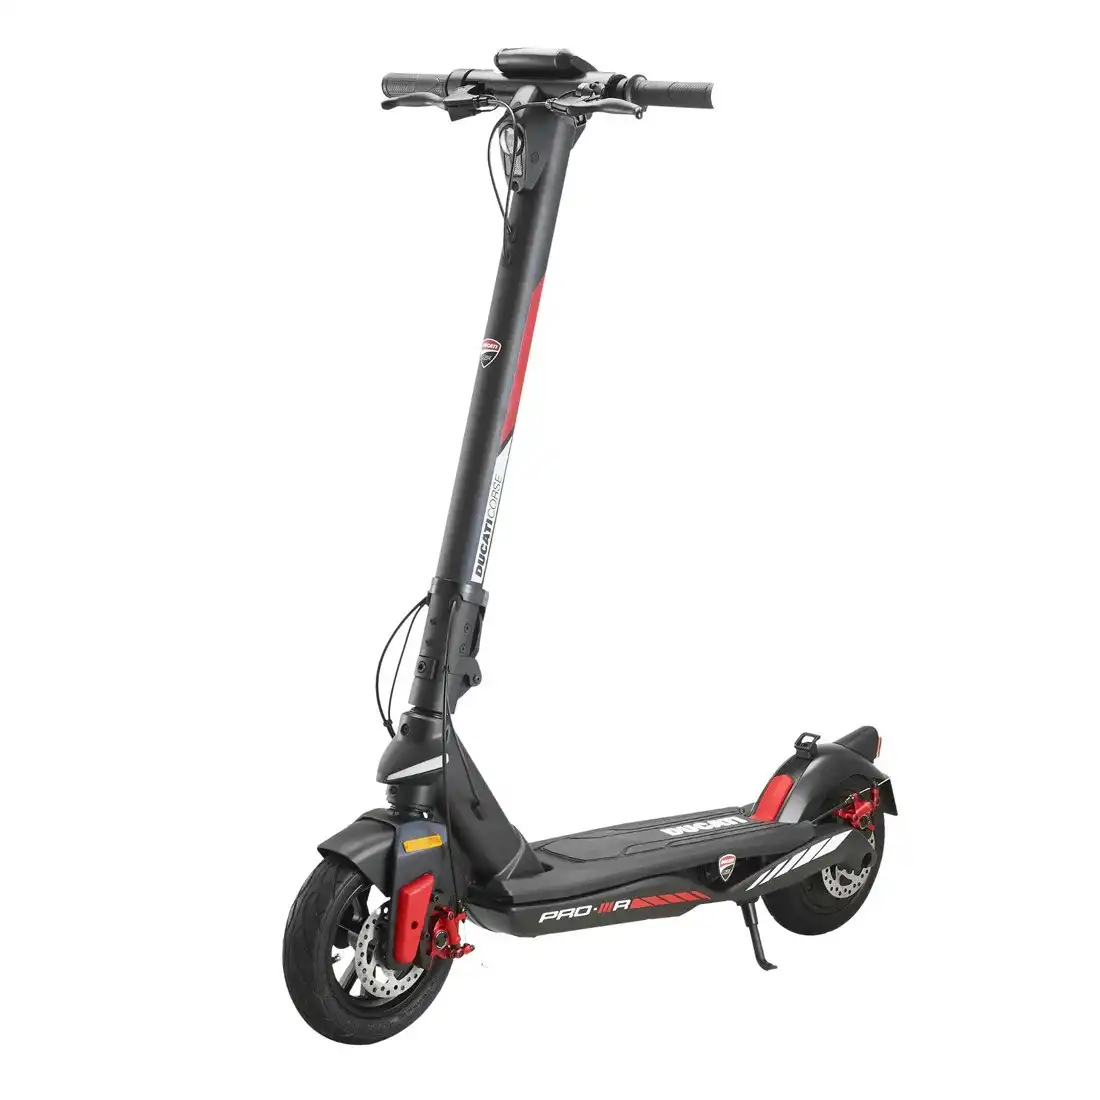 Ducati Pro III R Electric Scooter - Black/Red